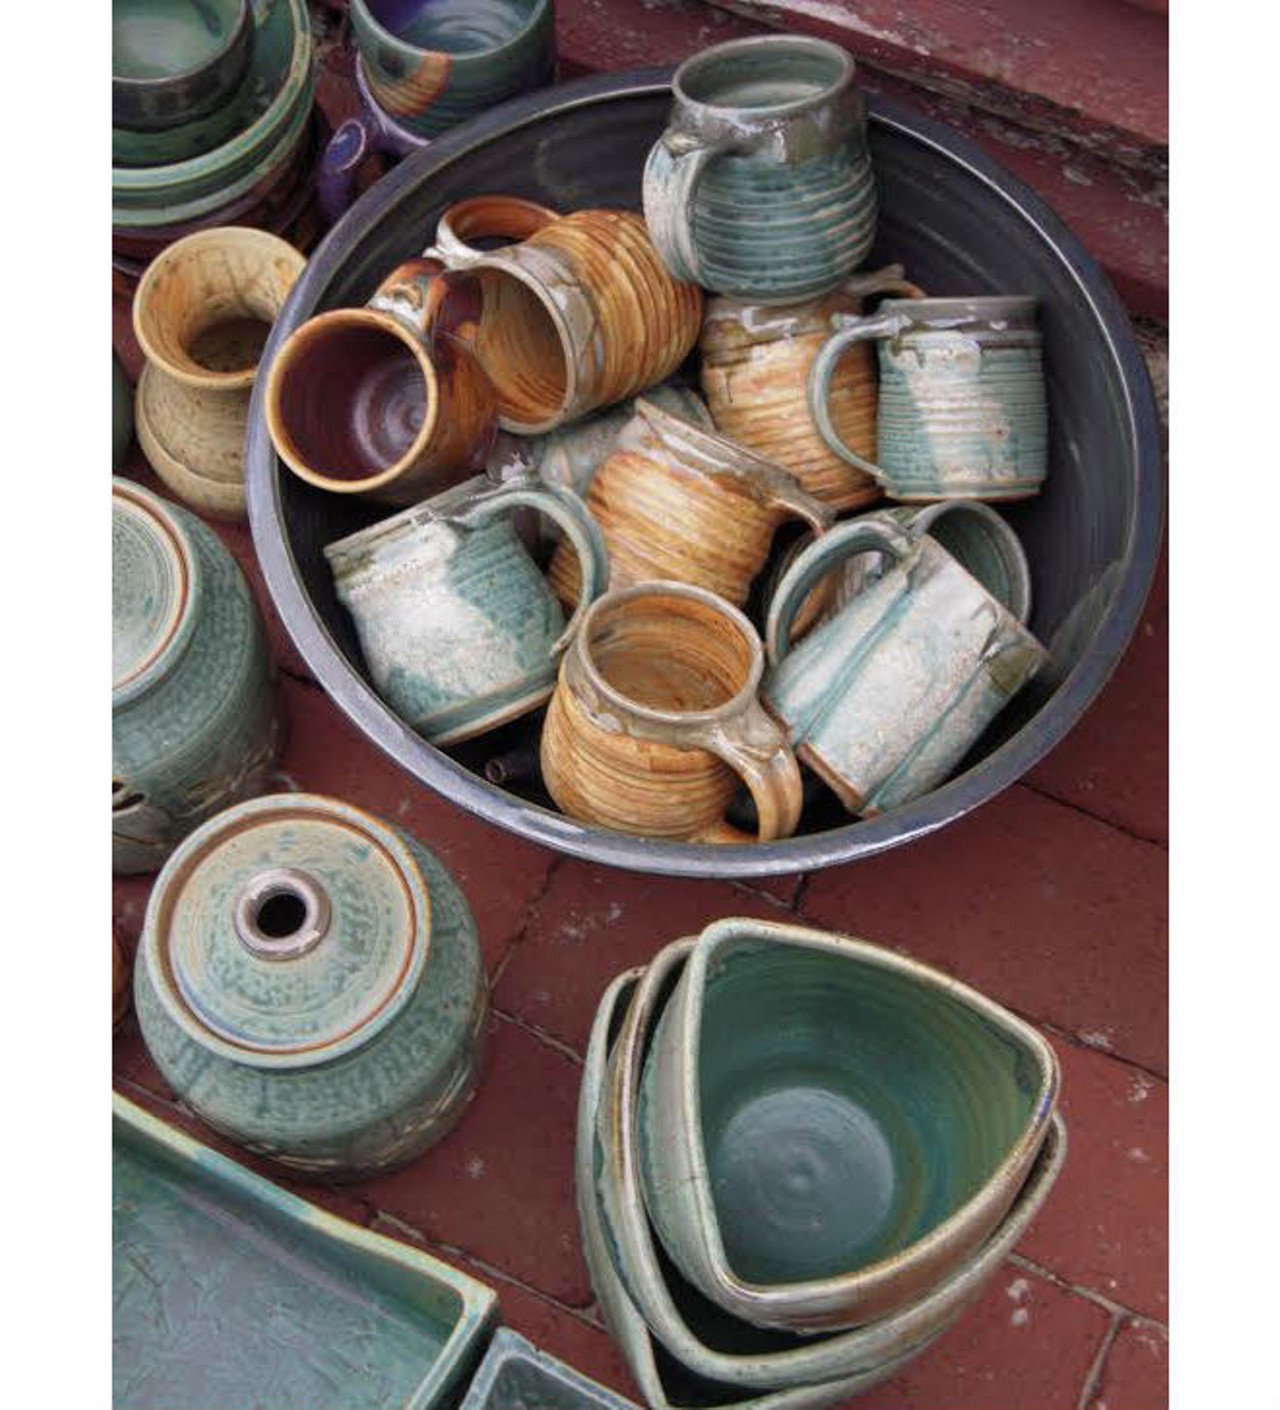 Friday-Saturday, Aug. 8-930th Annual Cup-A-Thon Ceramic SaleBrowse hundreds of handmade ceramic cups, mugs, goblets and bowls crafted by the talented artists of Creald&eacute; School of Art. Then buy some food and drink to fill them.